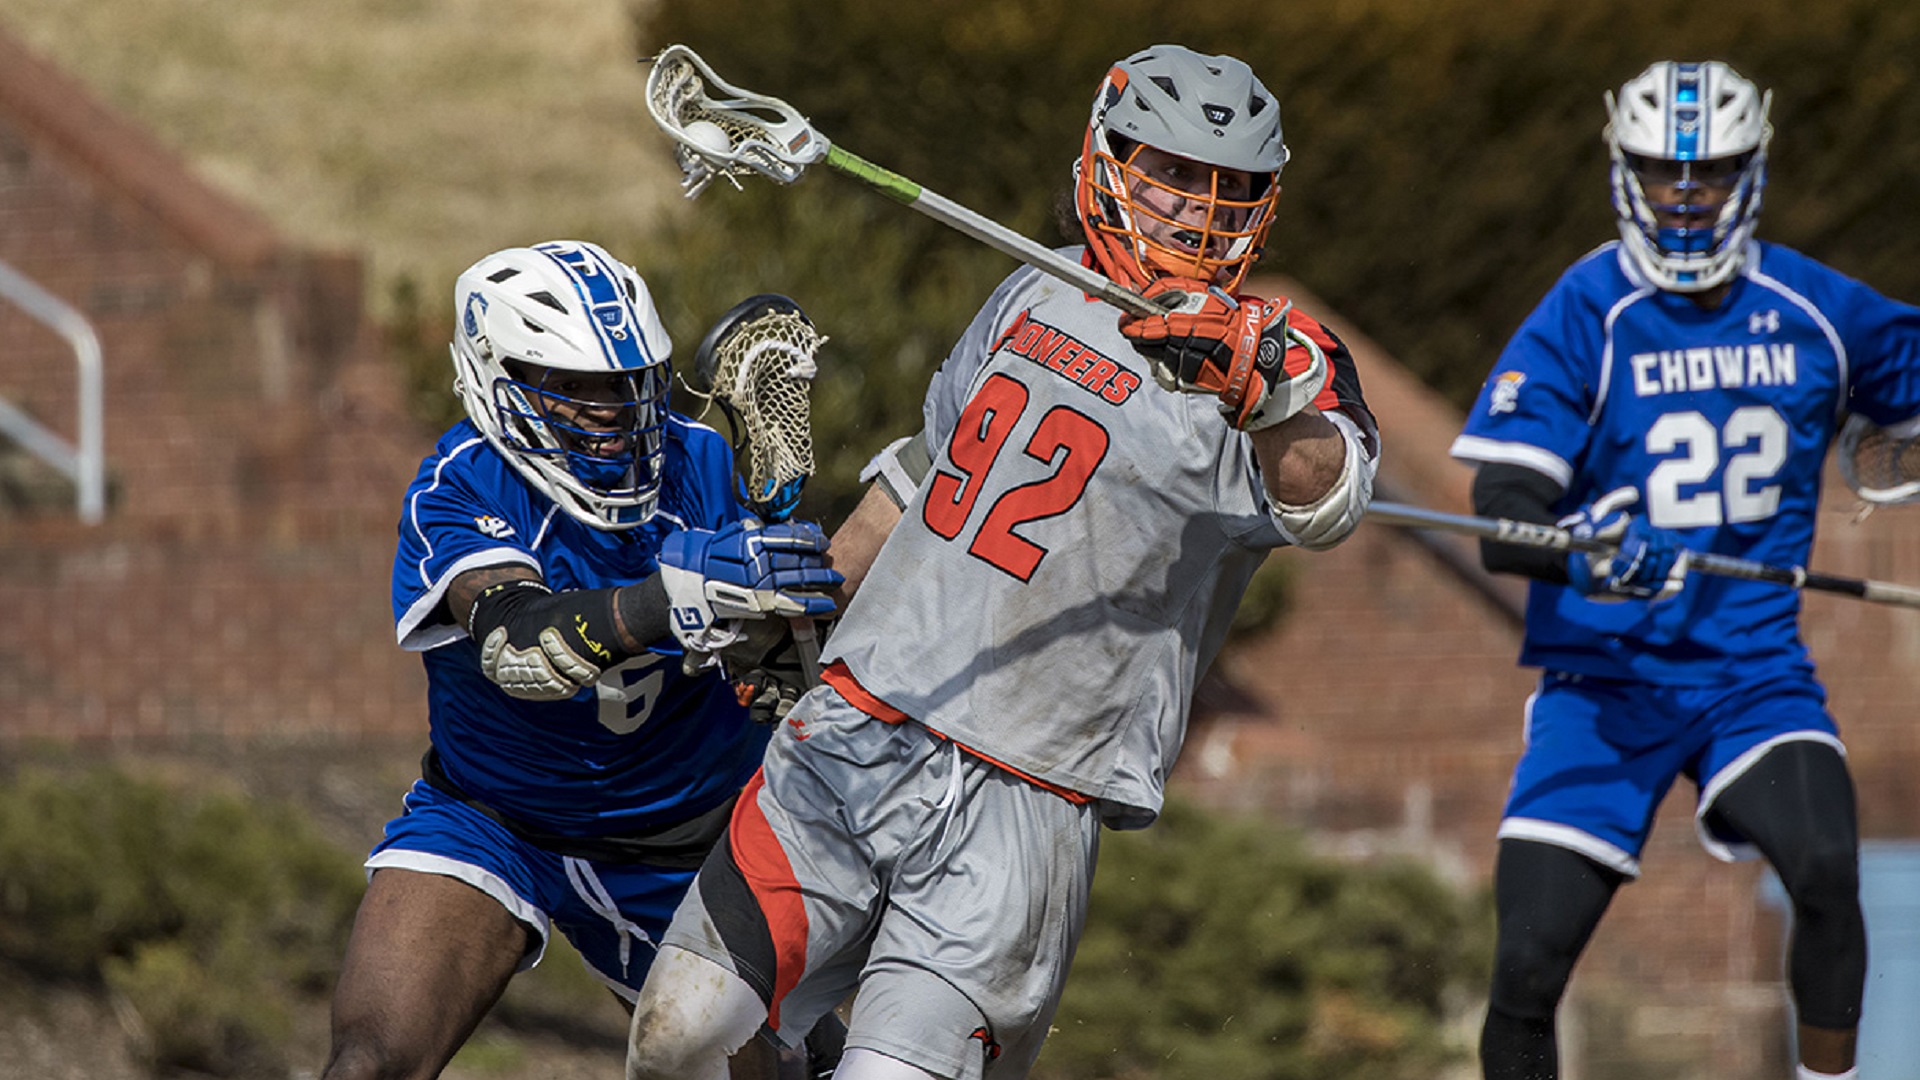 Andy Michalski earns one of his 25 faceoff wins against Chowan (photo by Chuck Williams)